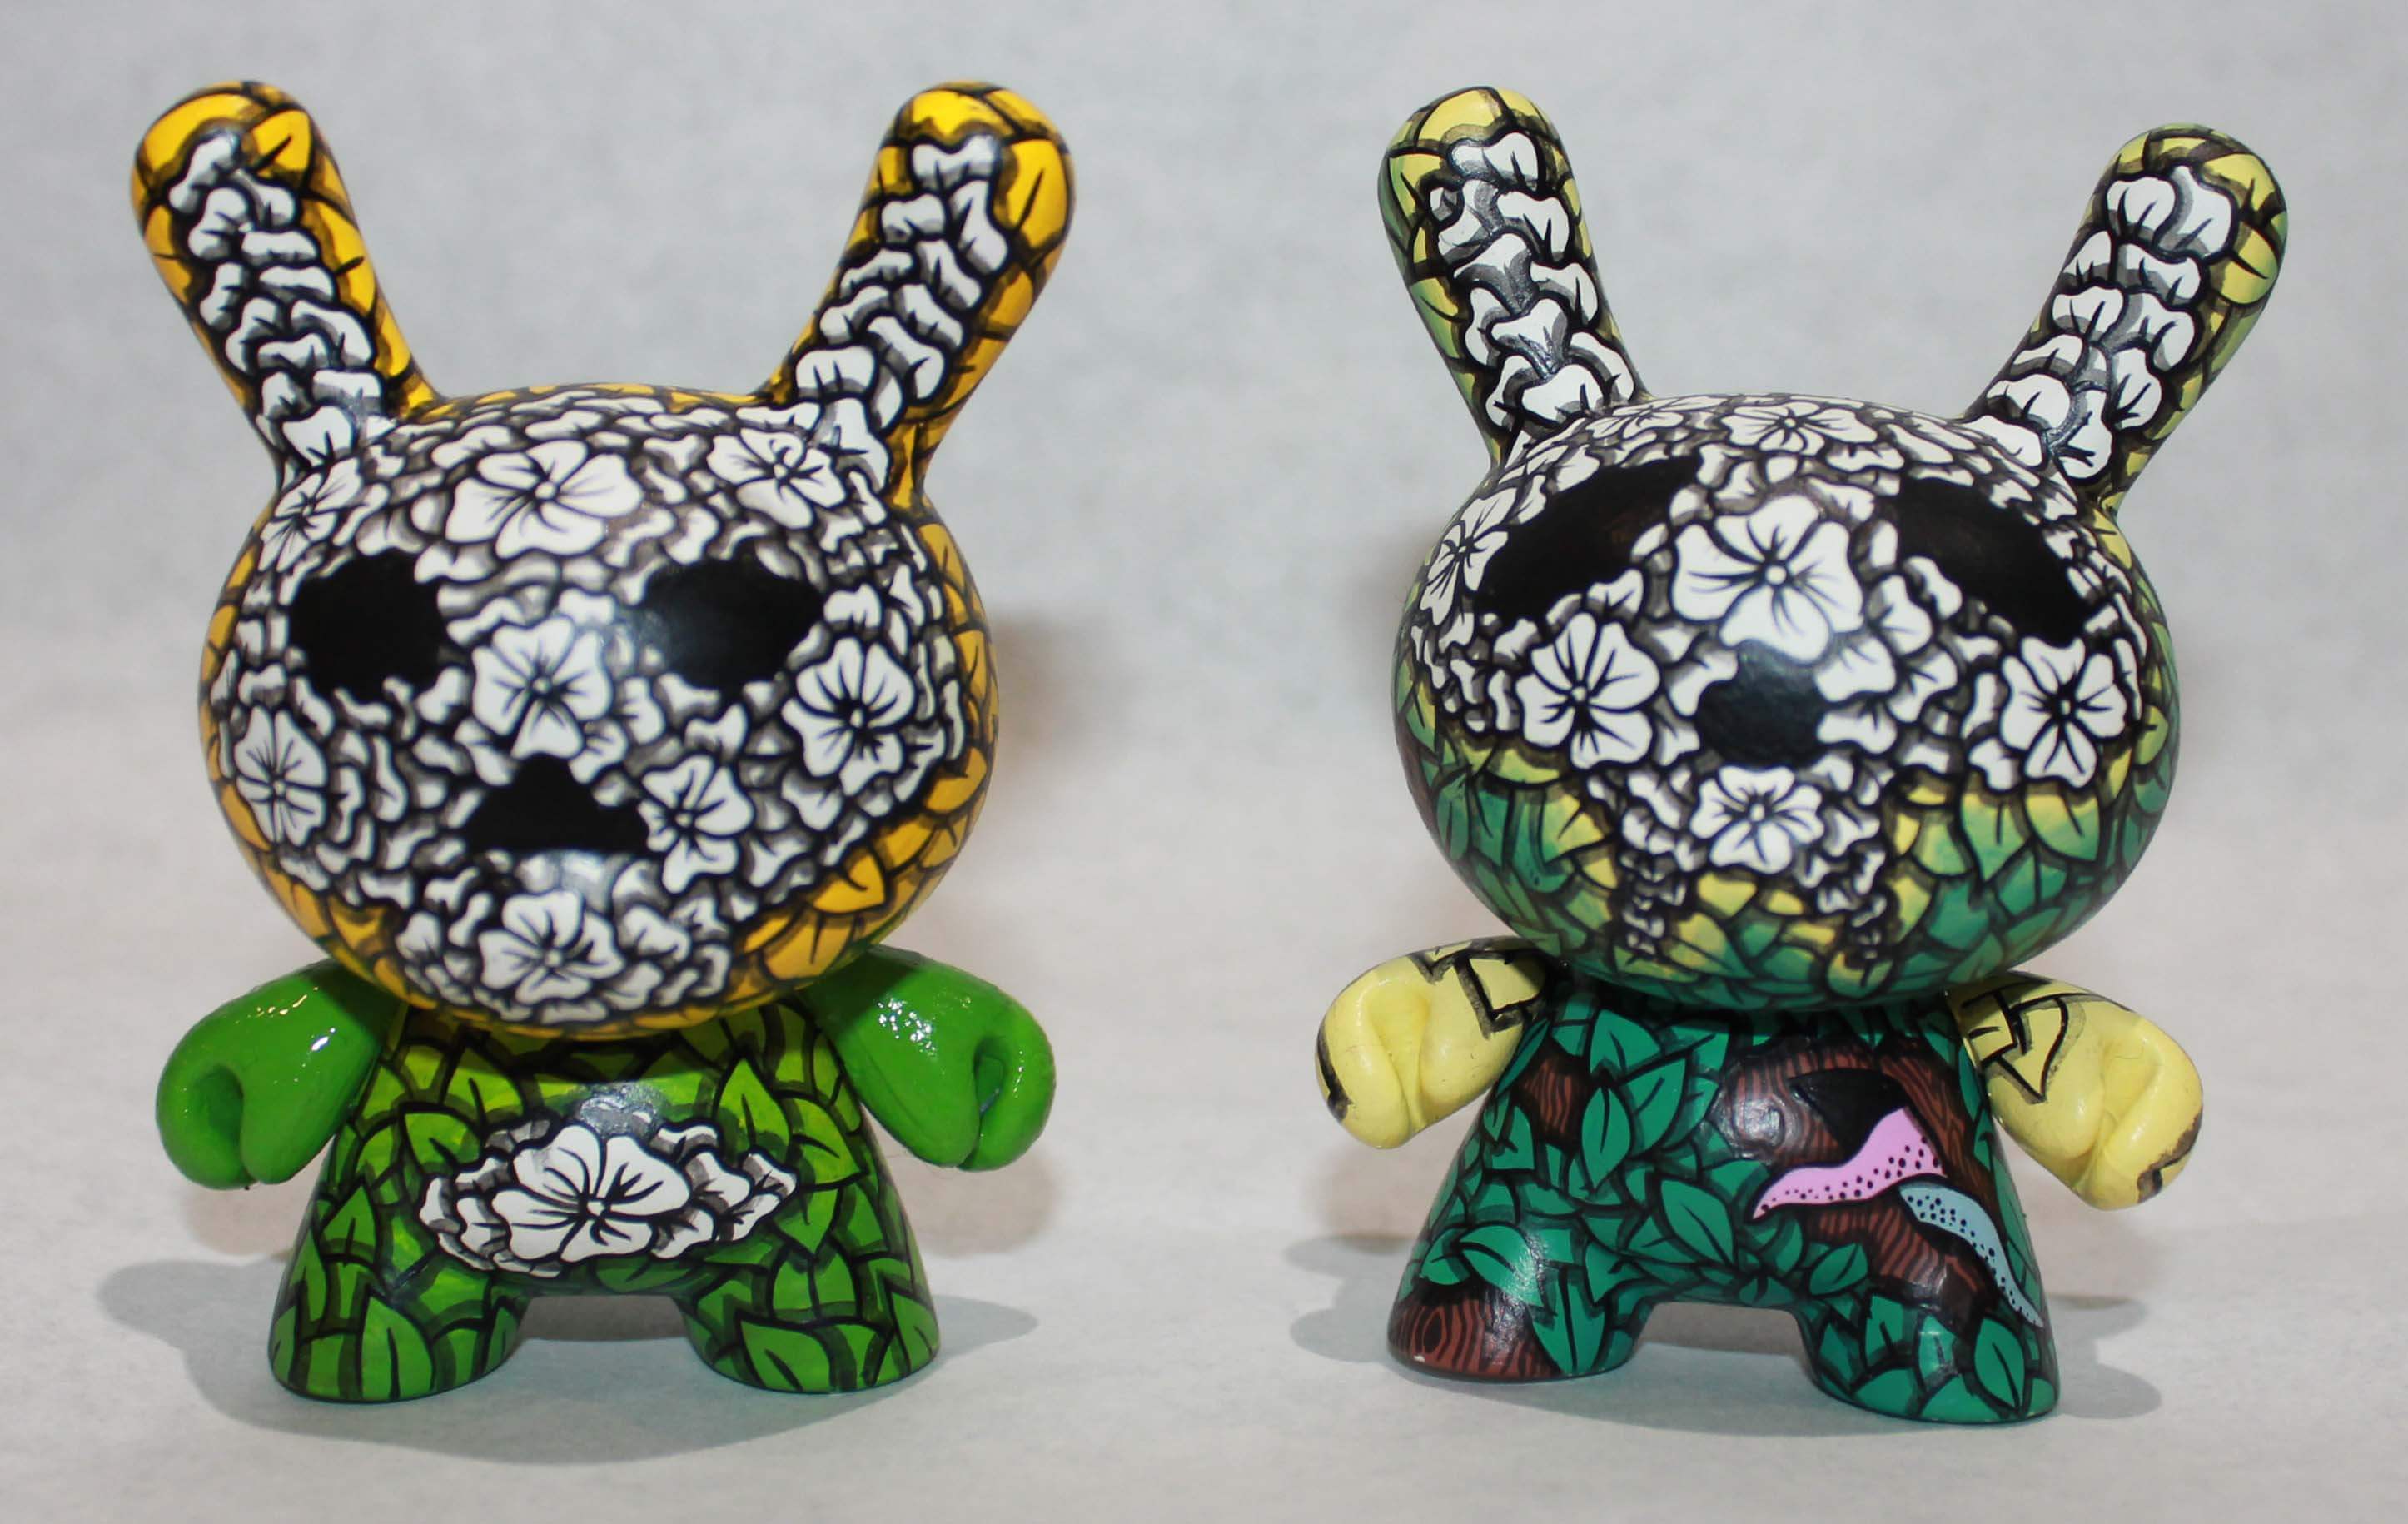 dunny2